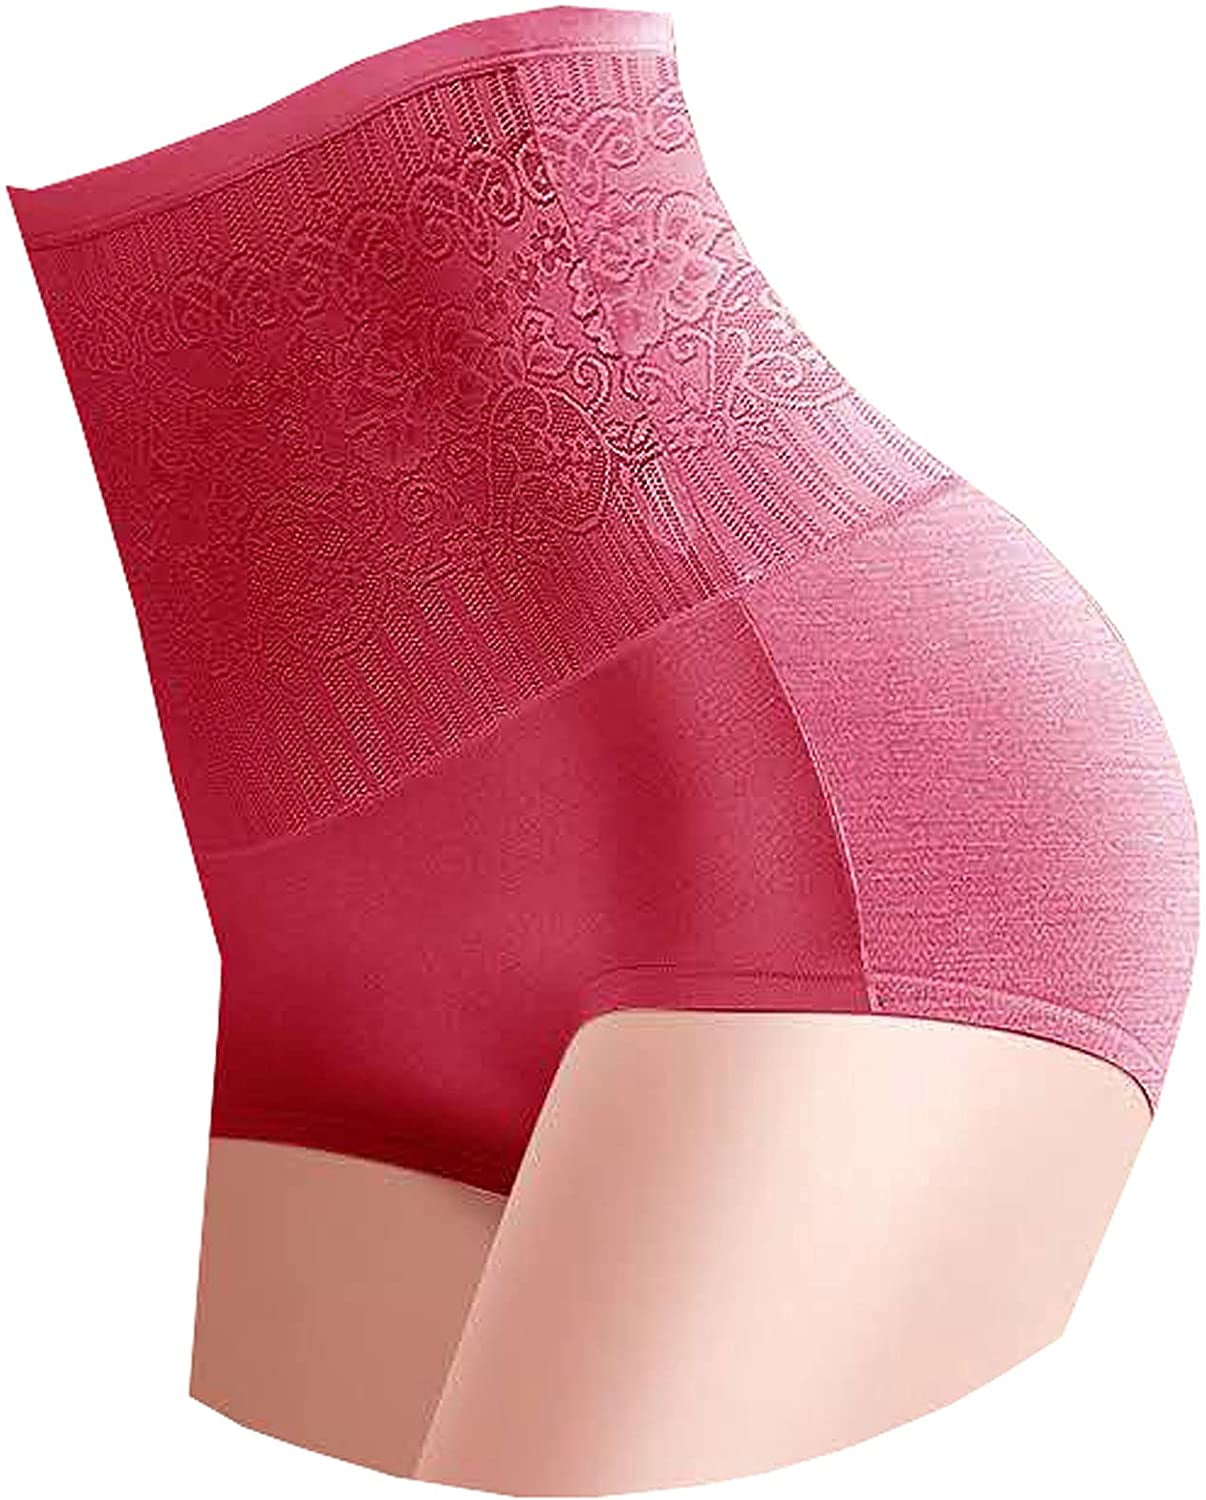 Tummy Thigh Trimmer Body Shaper Slimming Knickers Pants Trimmer Tuck Control UK